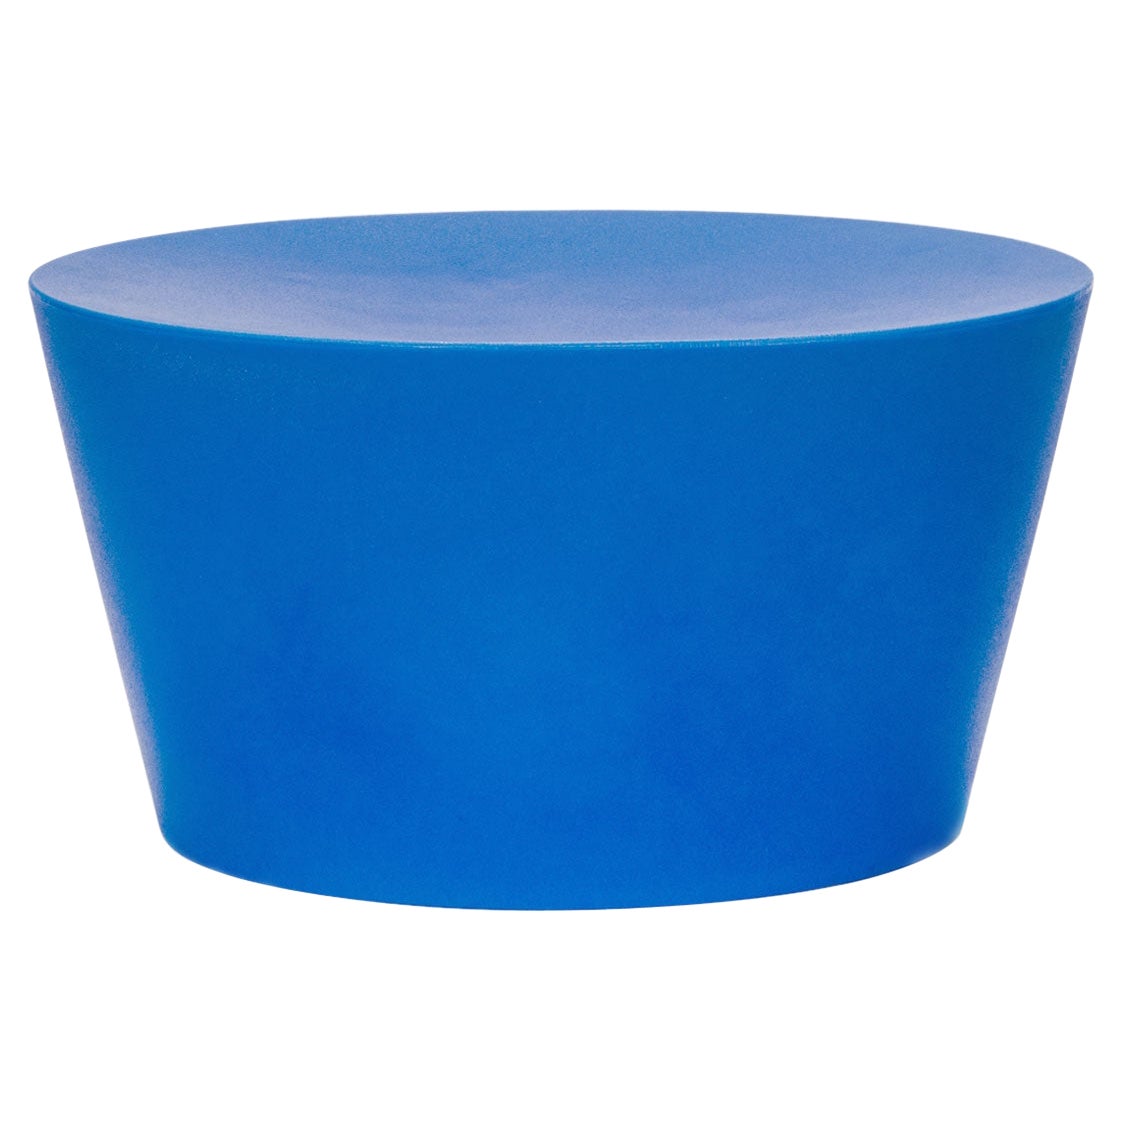 Blue Indoor/Outdoor Side Table Or Seat, Knoll